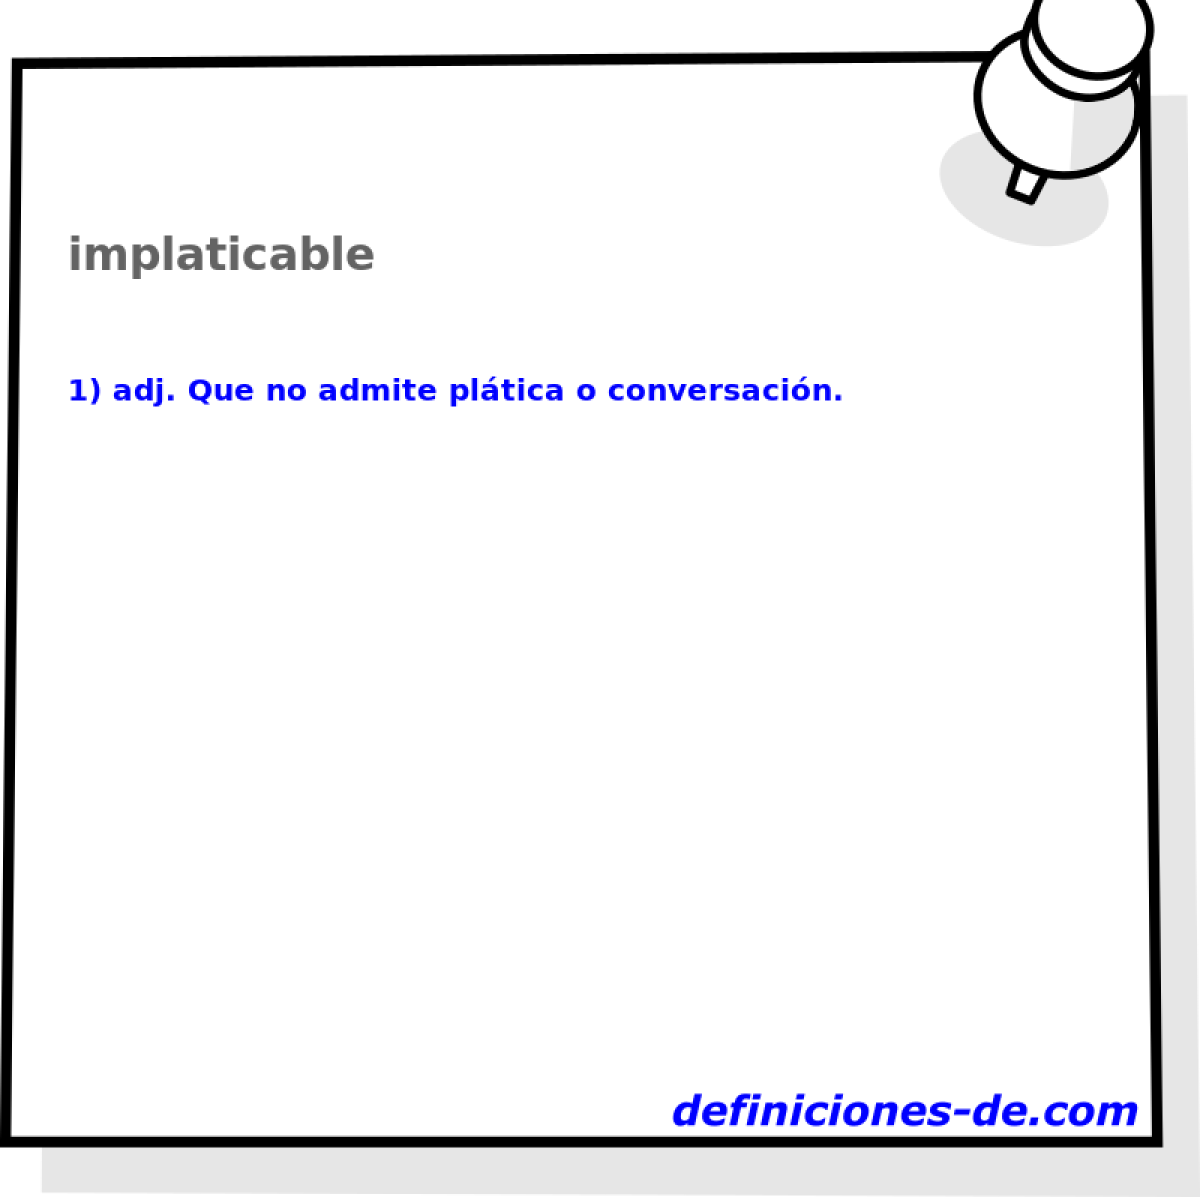 implaticable 